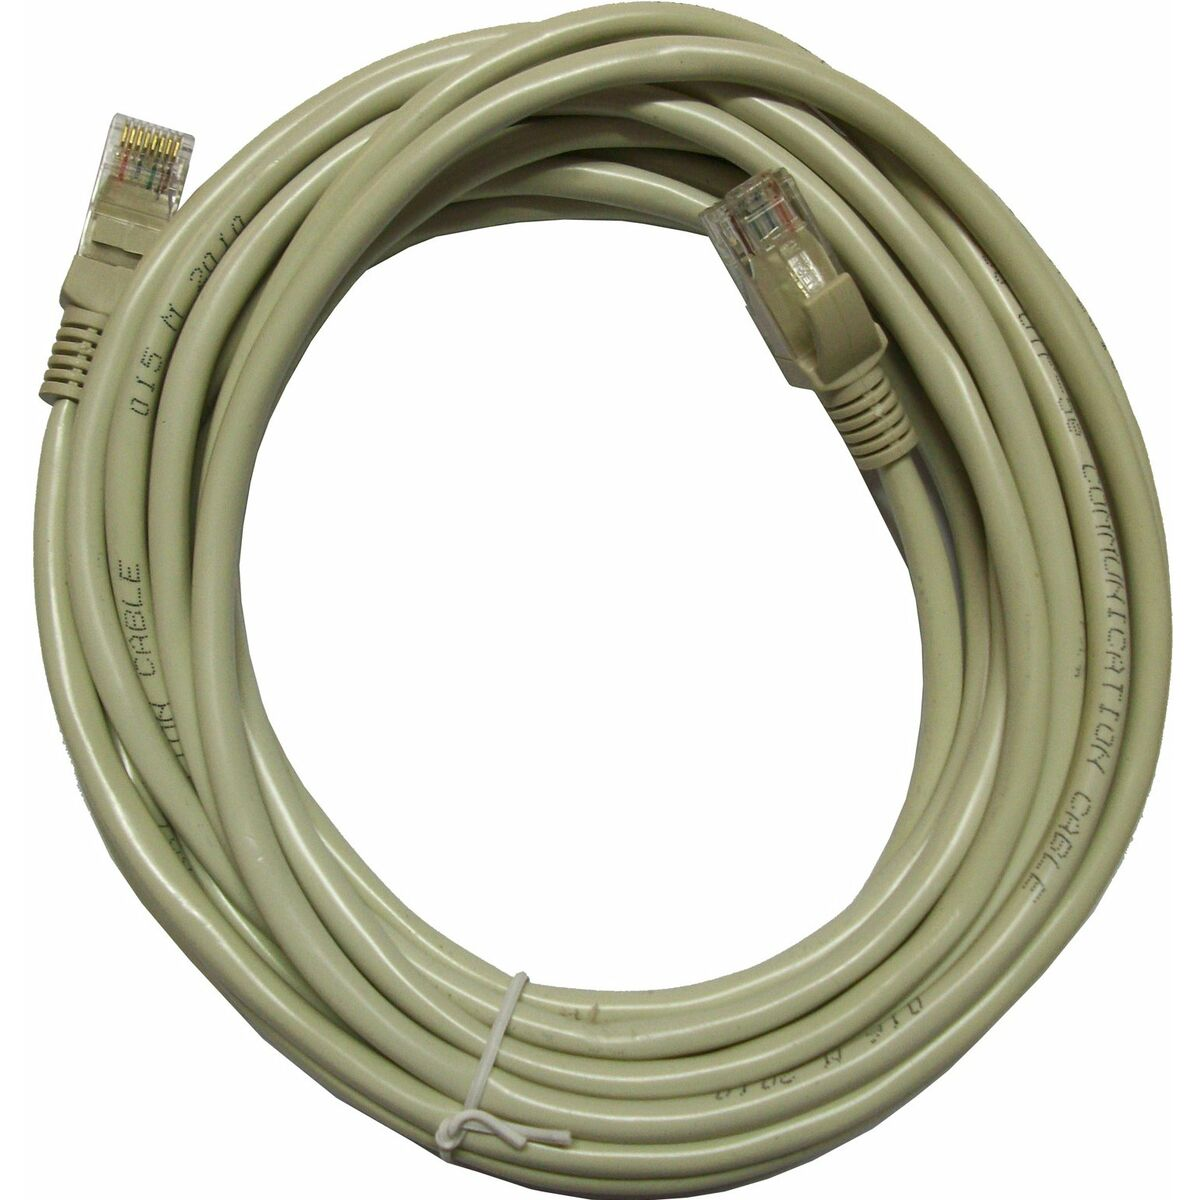 5e 3GO CAT FTP Rot CPATCH2 Kabel,